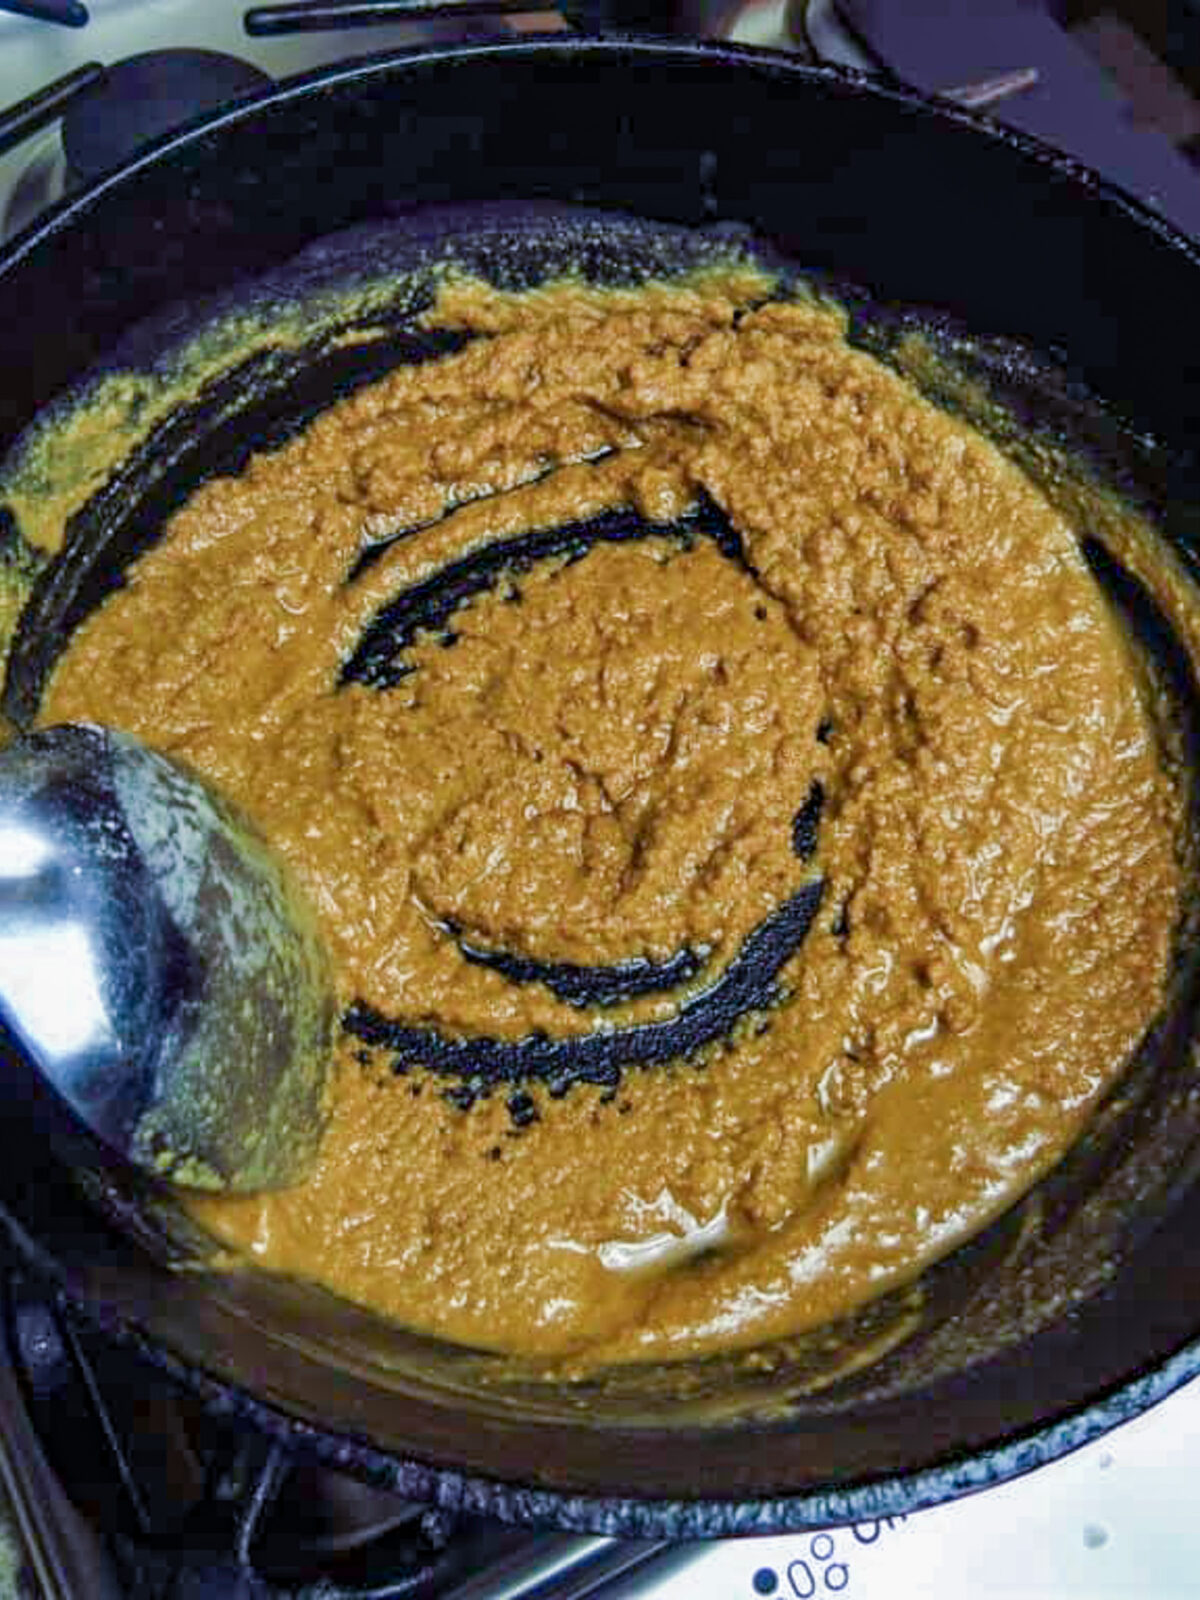 A silver spoon stirring a light colored roux in a black pot.